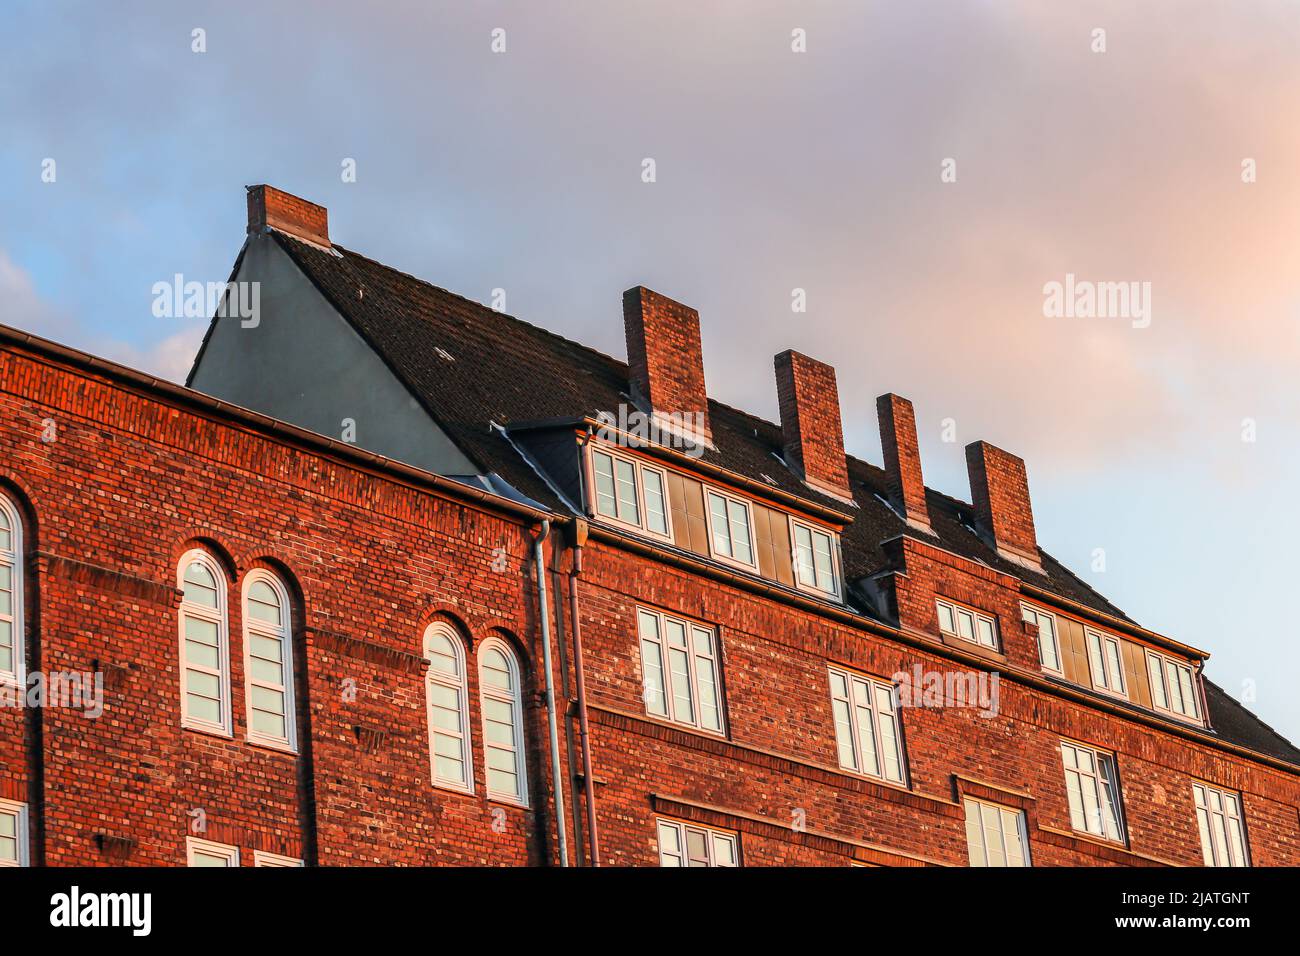 red brick apartment buildings with wide chimneys Stock Photo